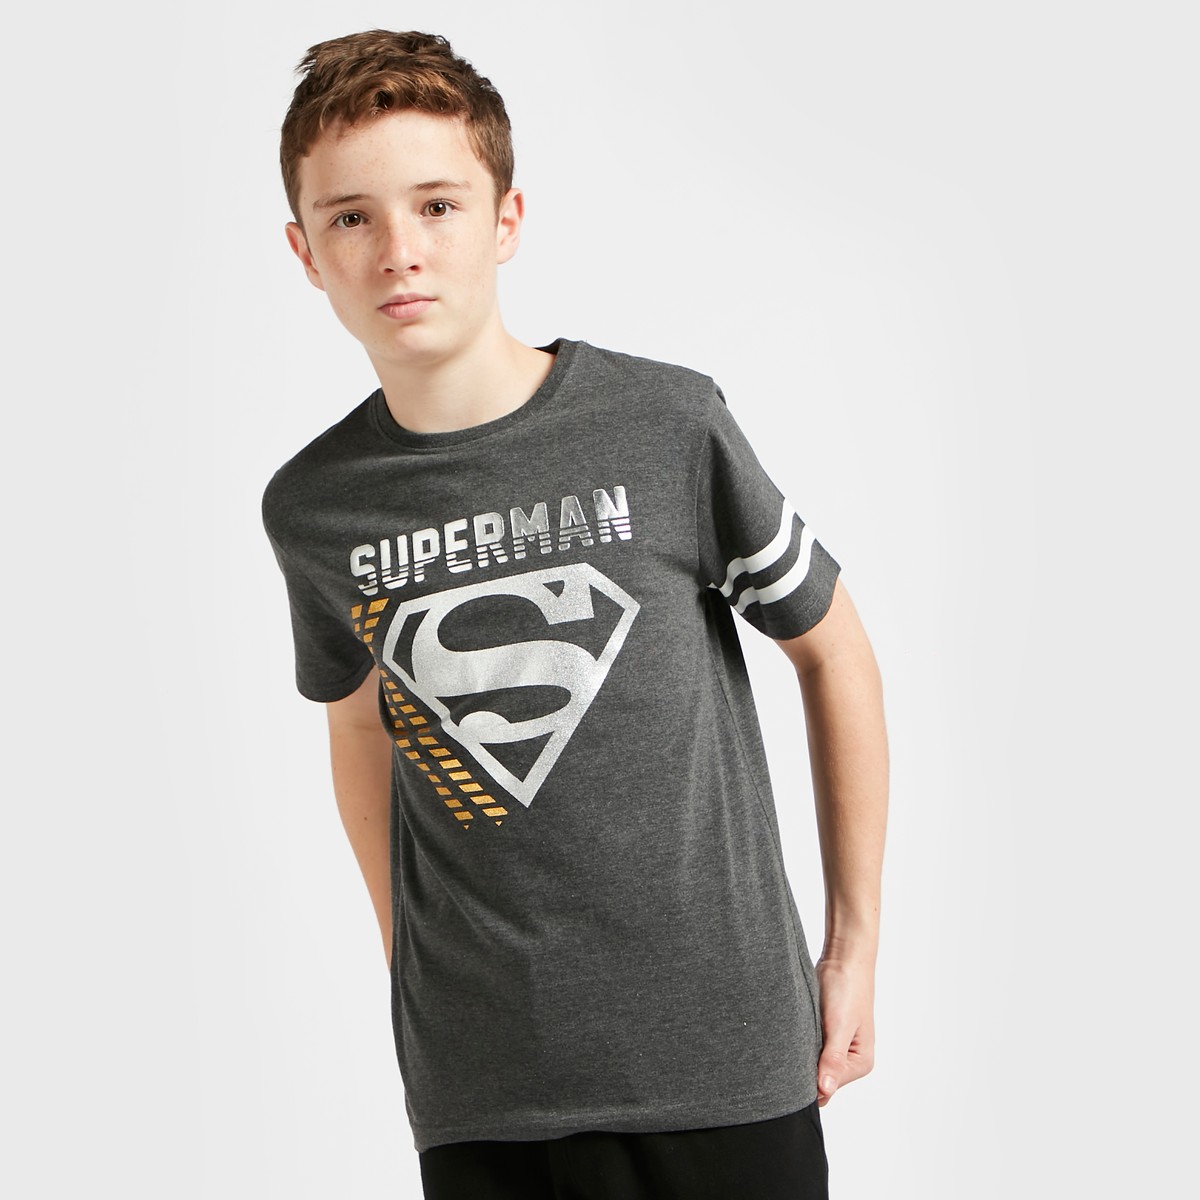 Superman Foil Print T-shirt with Crew Neck and Short Sleeves 1